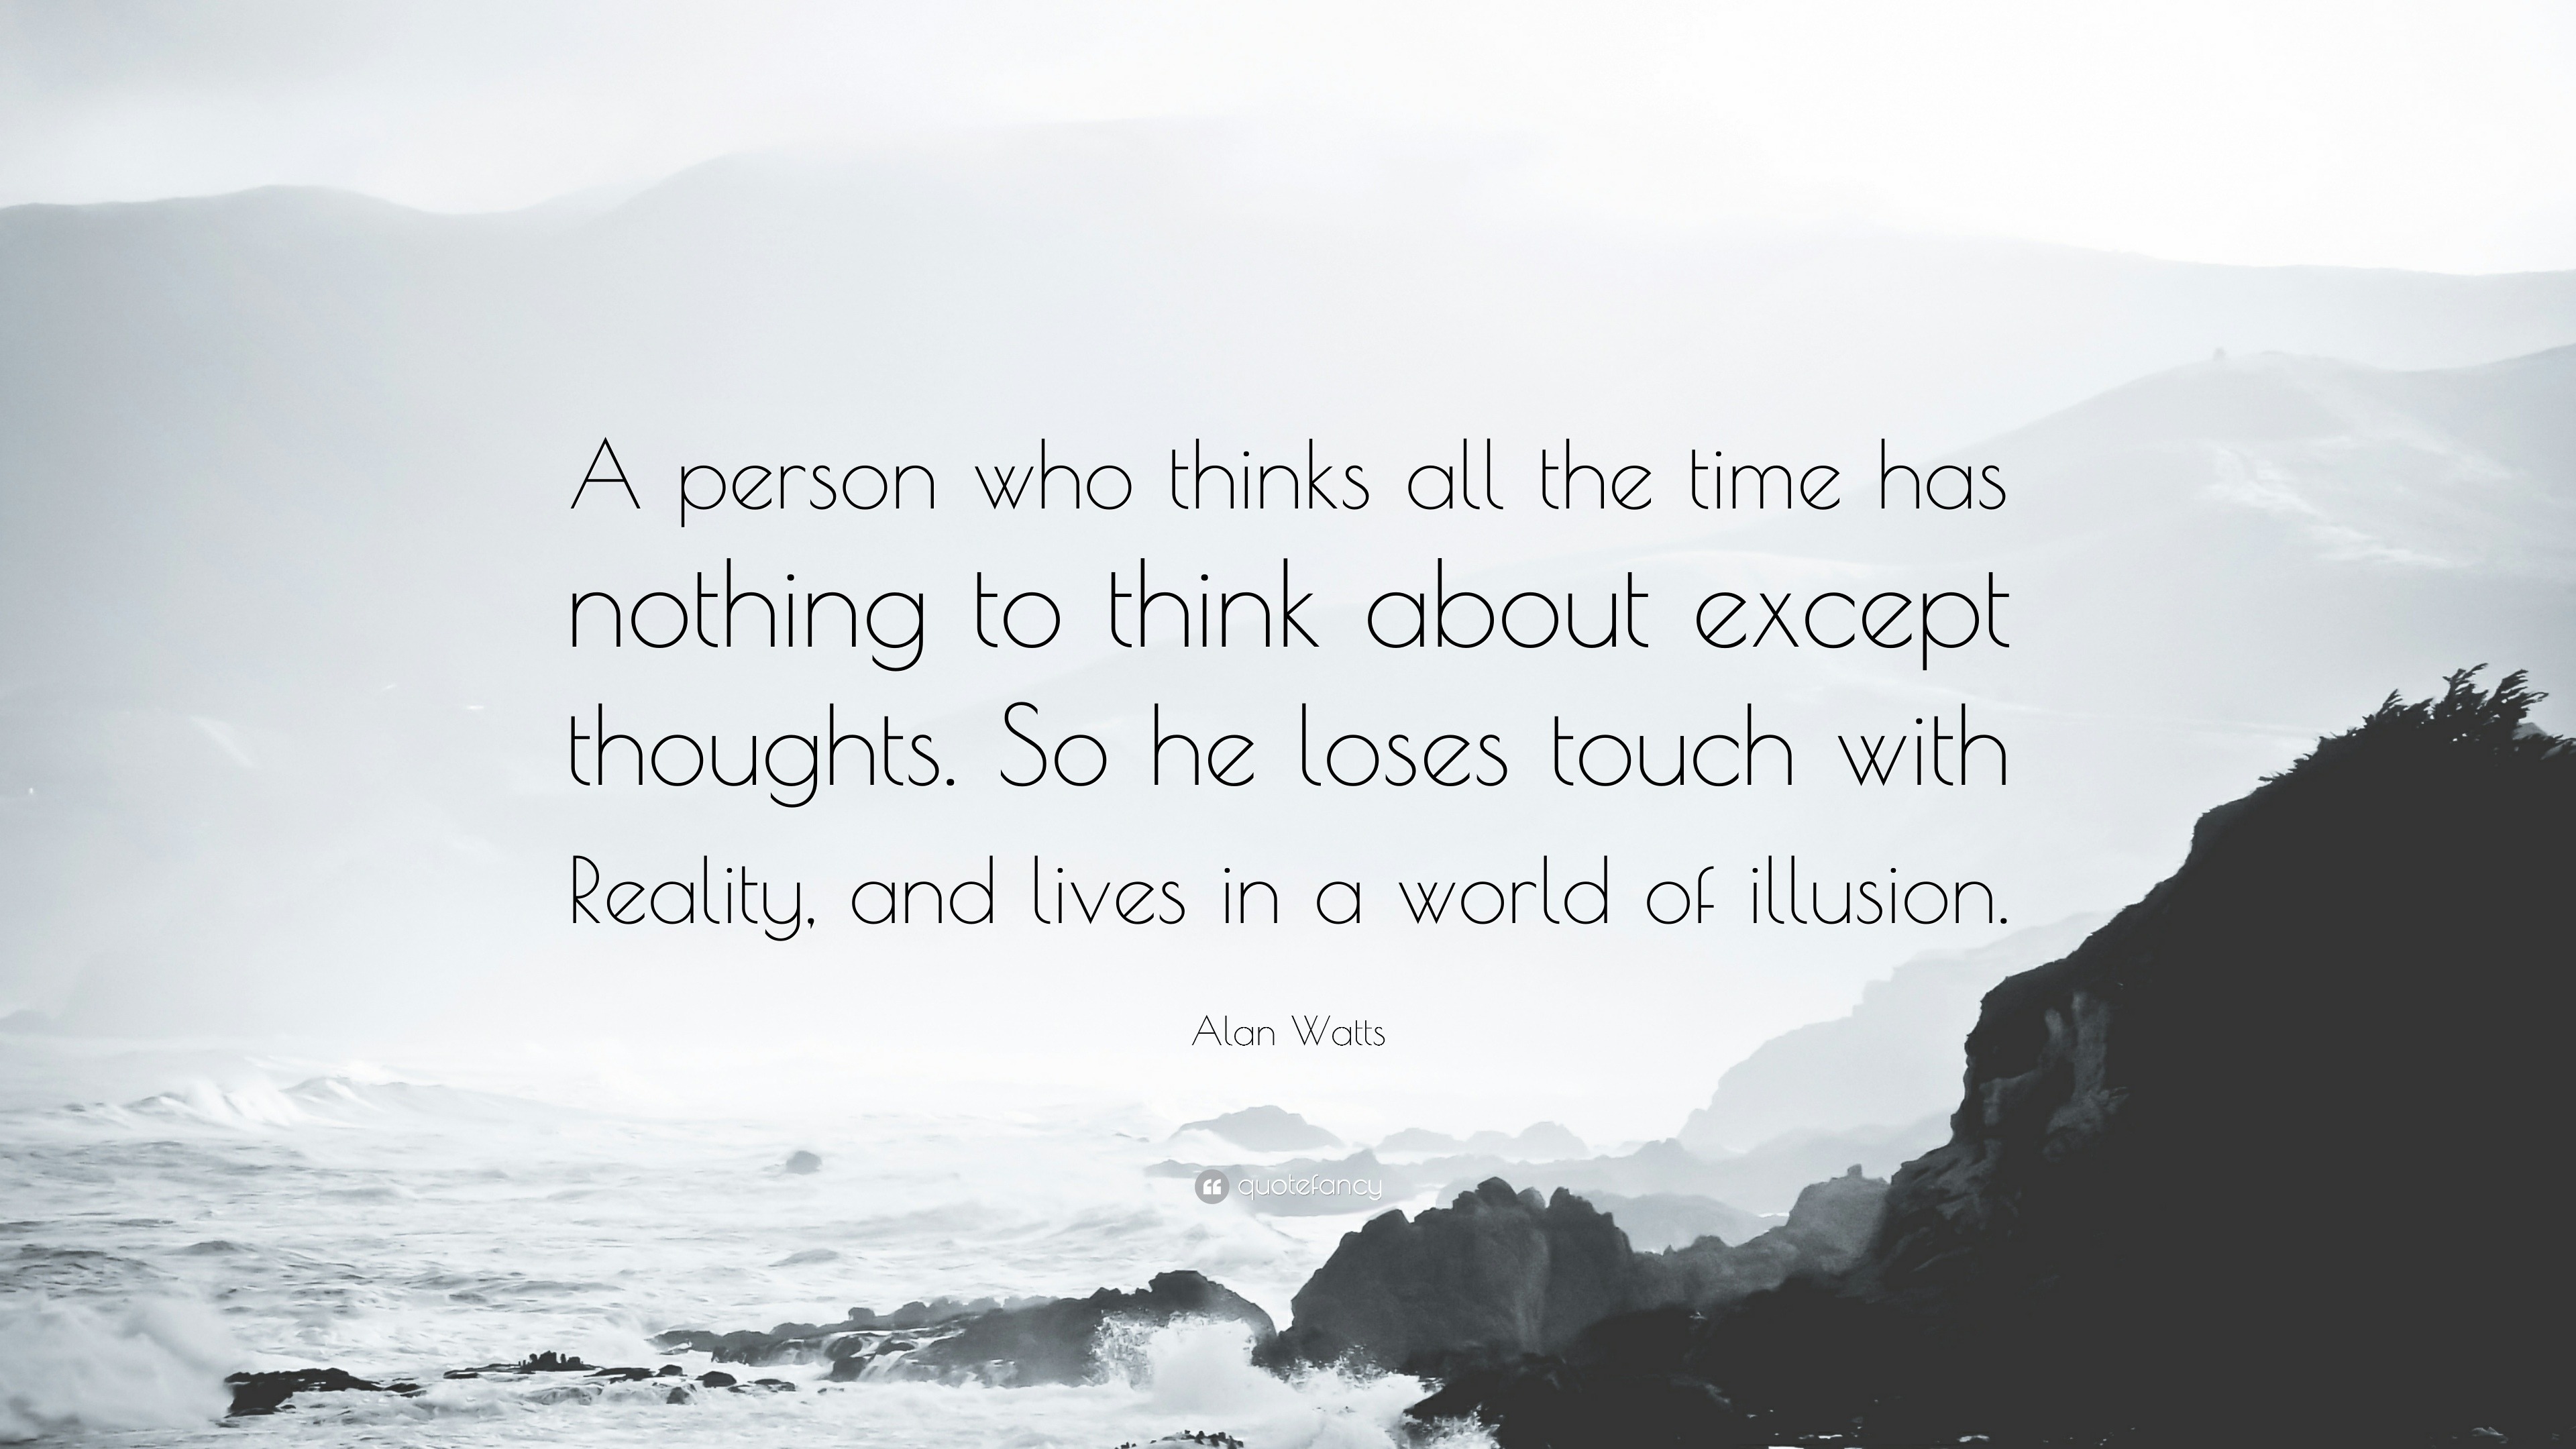 Alan Watts Quote: “A person who thinks all the time has nothing to about except thoughts. So he loses touch with Reality, and lives i...”